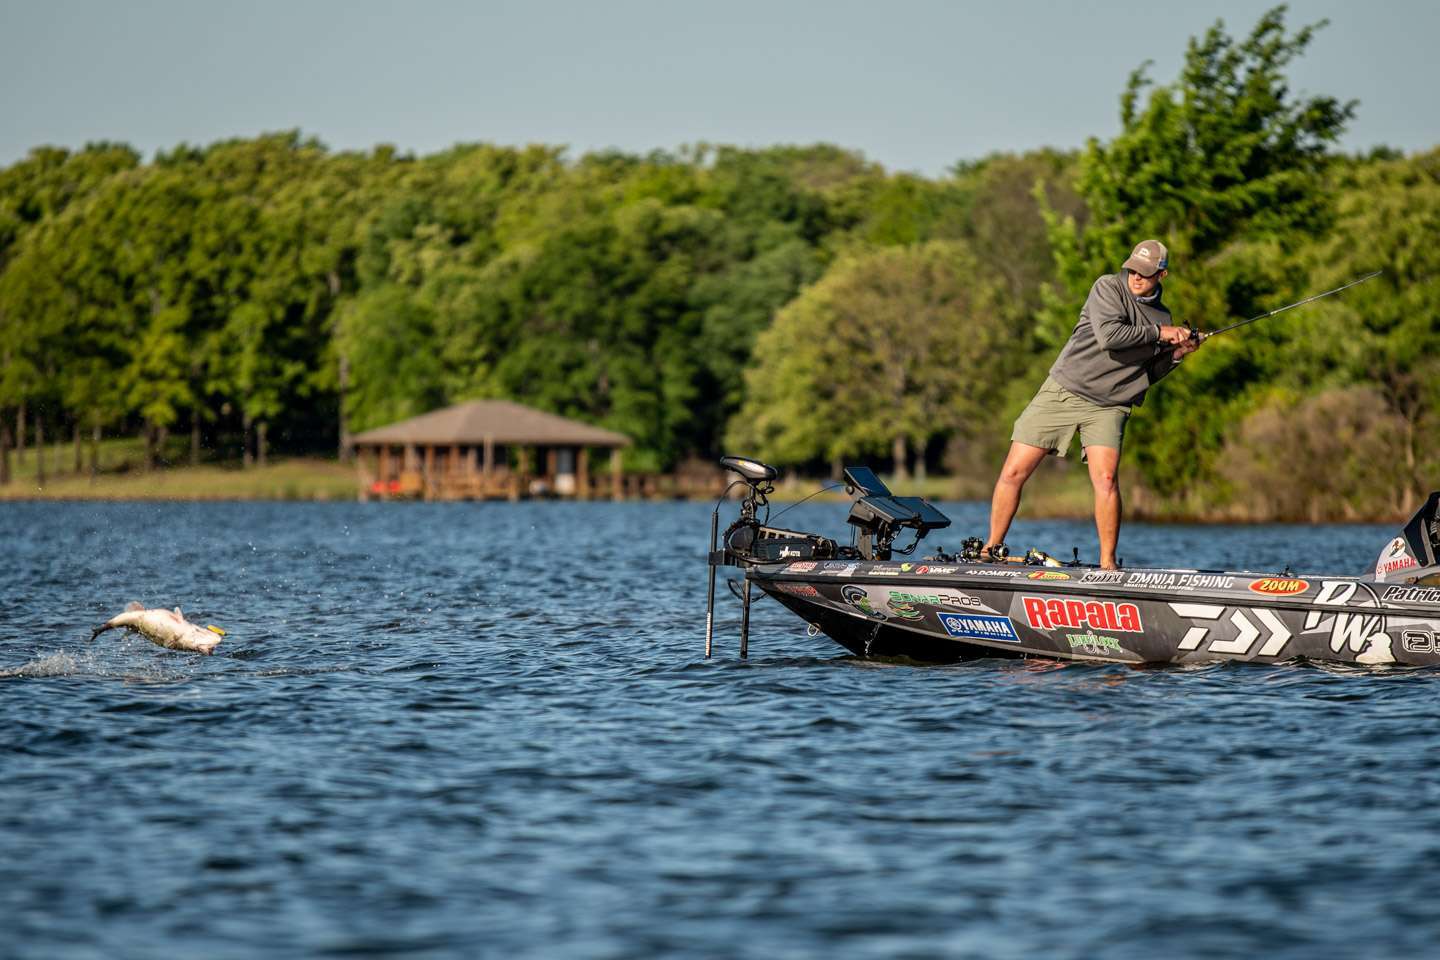 <h4>Patrick Walters</h4>
Summerville, South Carolina<br>
Qualified via the 2021 Bassmaster Elite Series  <br>
2021 AOY Rank: 4 (668 points)
